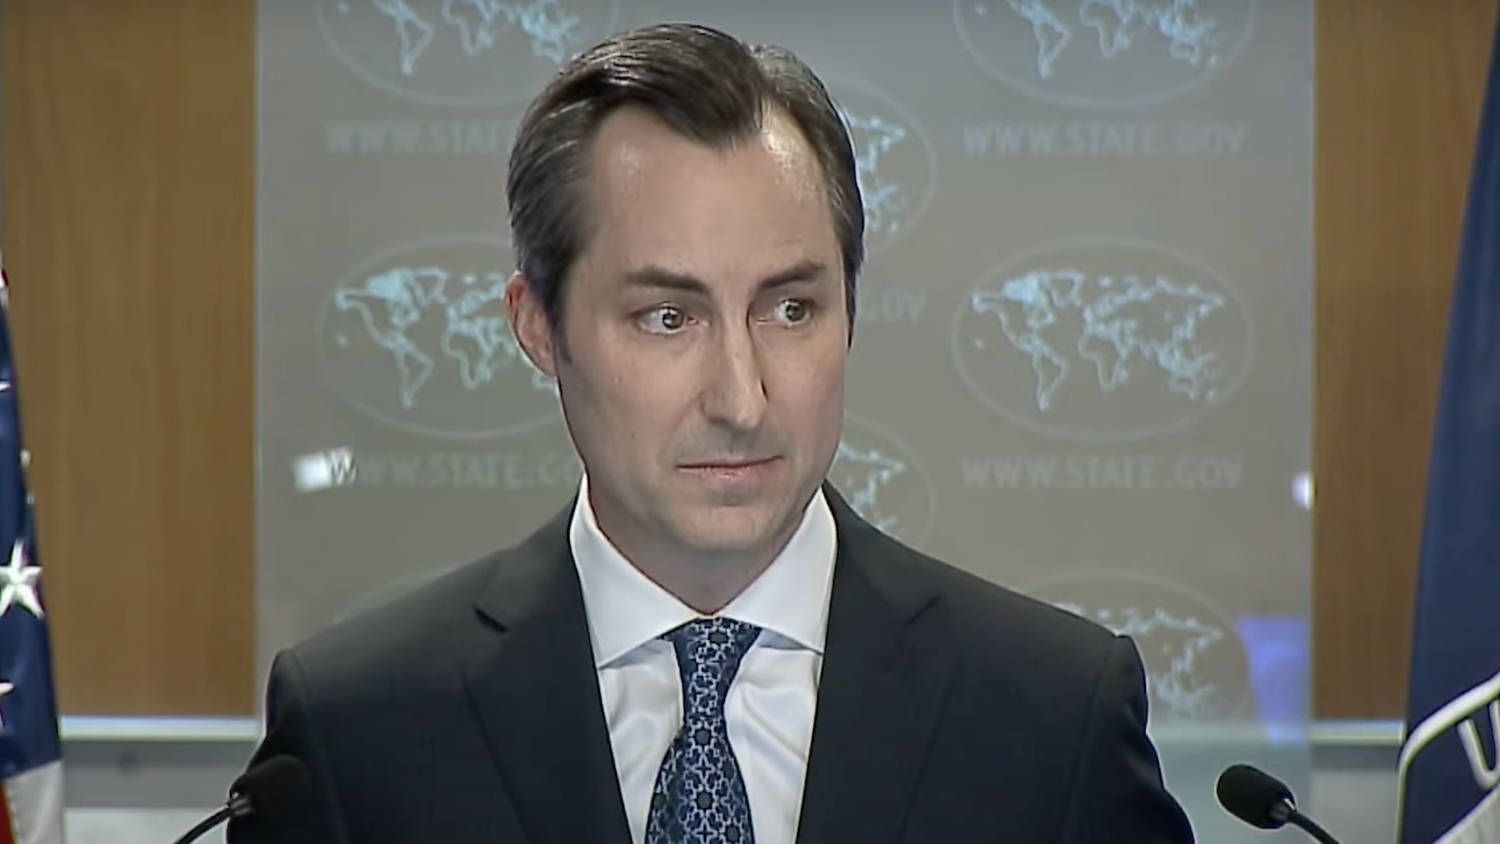 The comments from Miller come more than a week after Middle East Eye reported that Iran and the US were nearing a temporary deal.